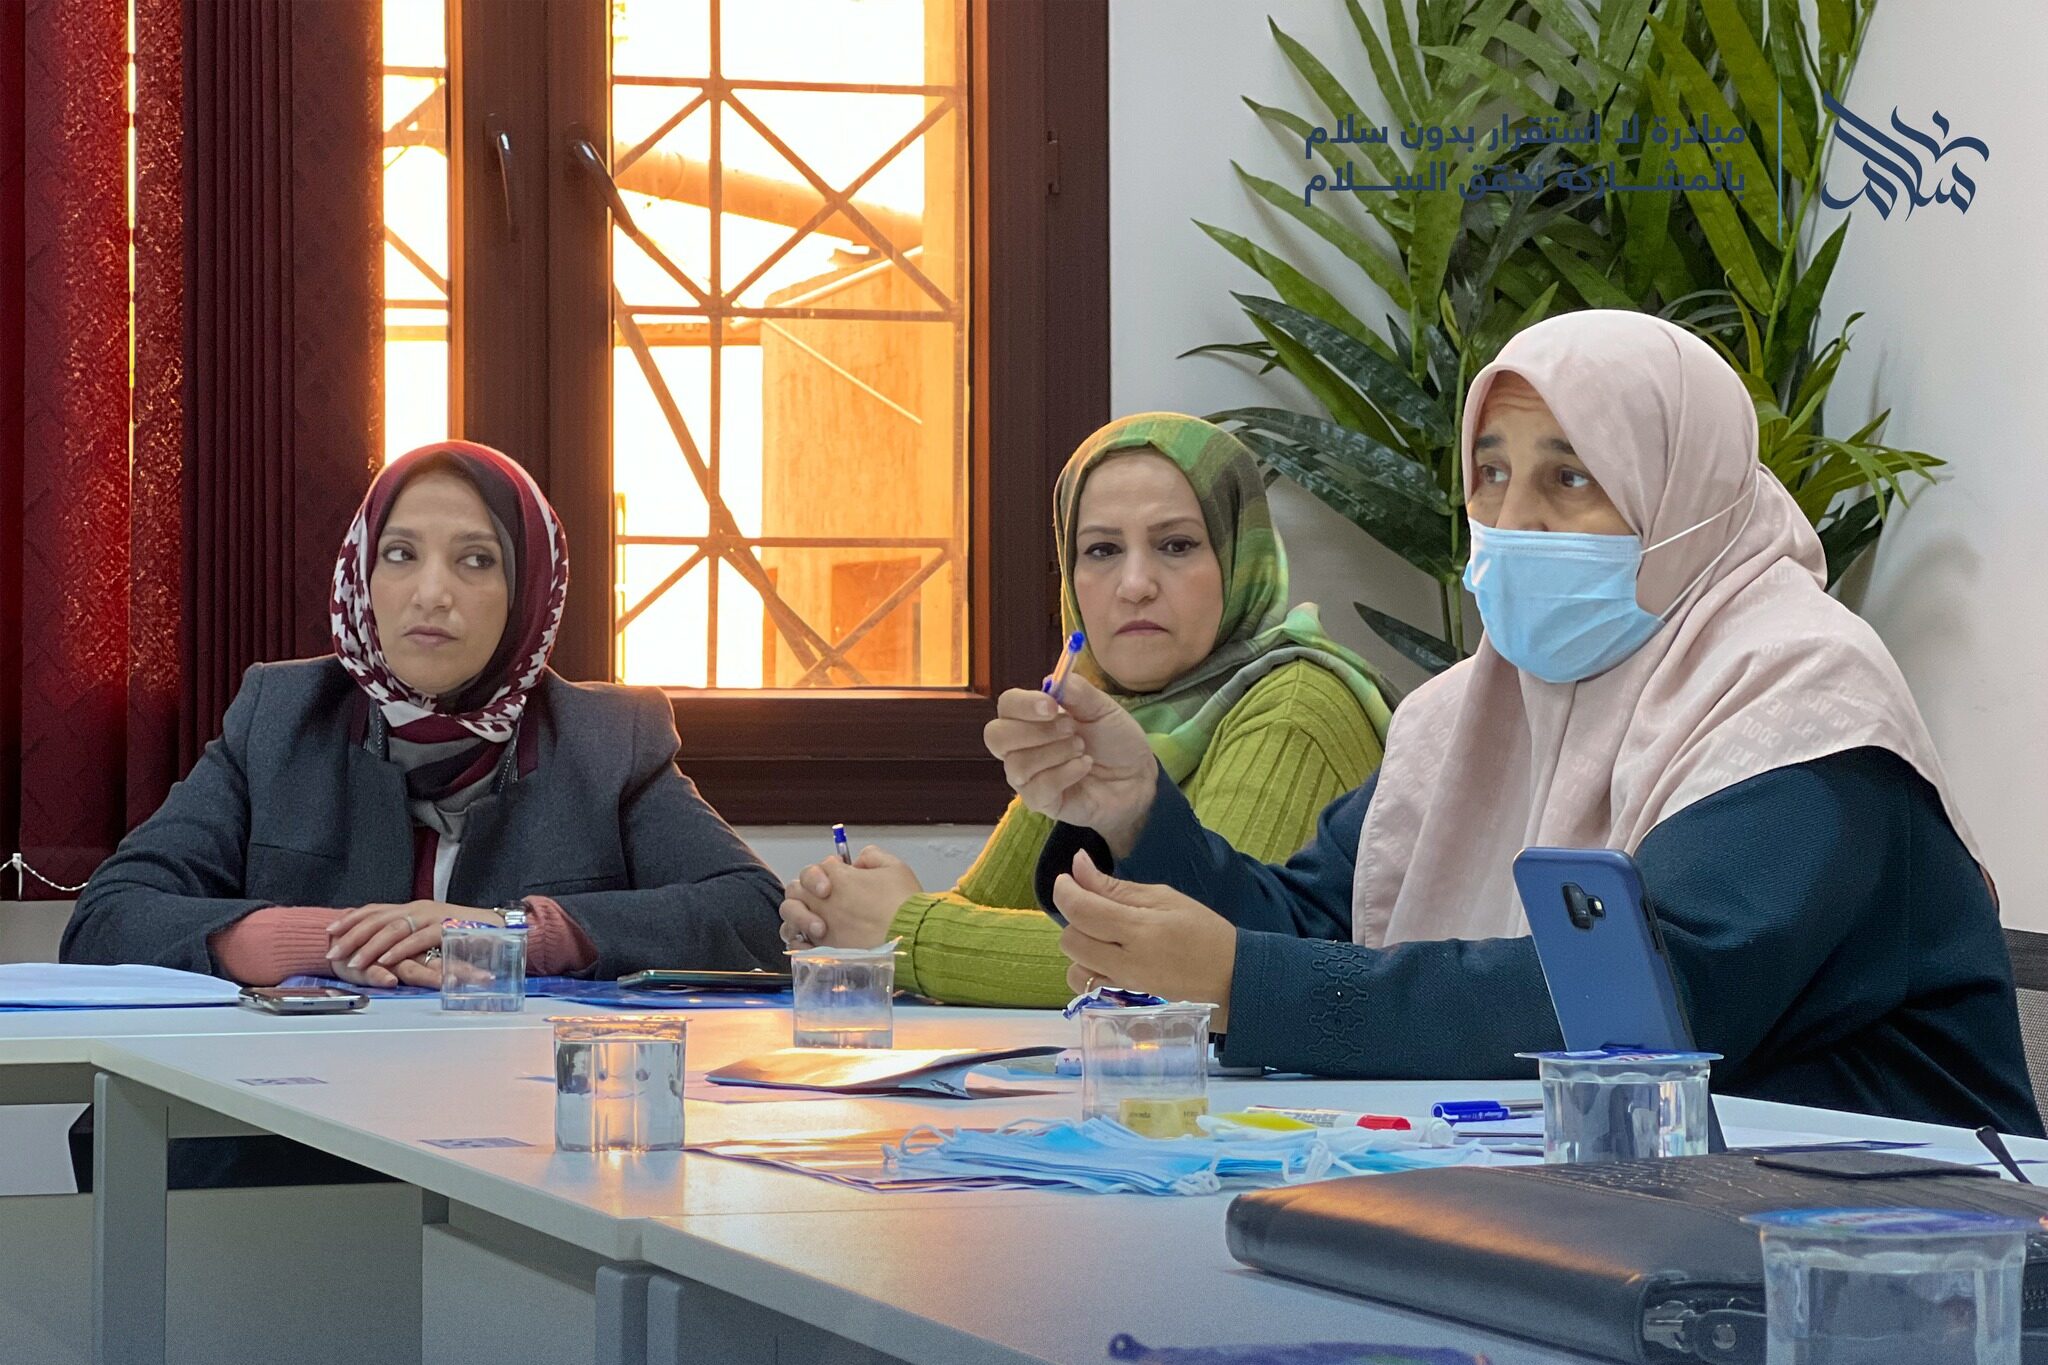 participants during a dialogue session organised by the Tripoli Centre SPP